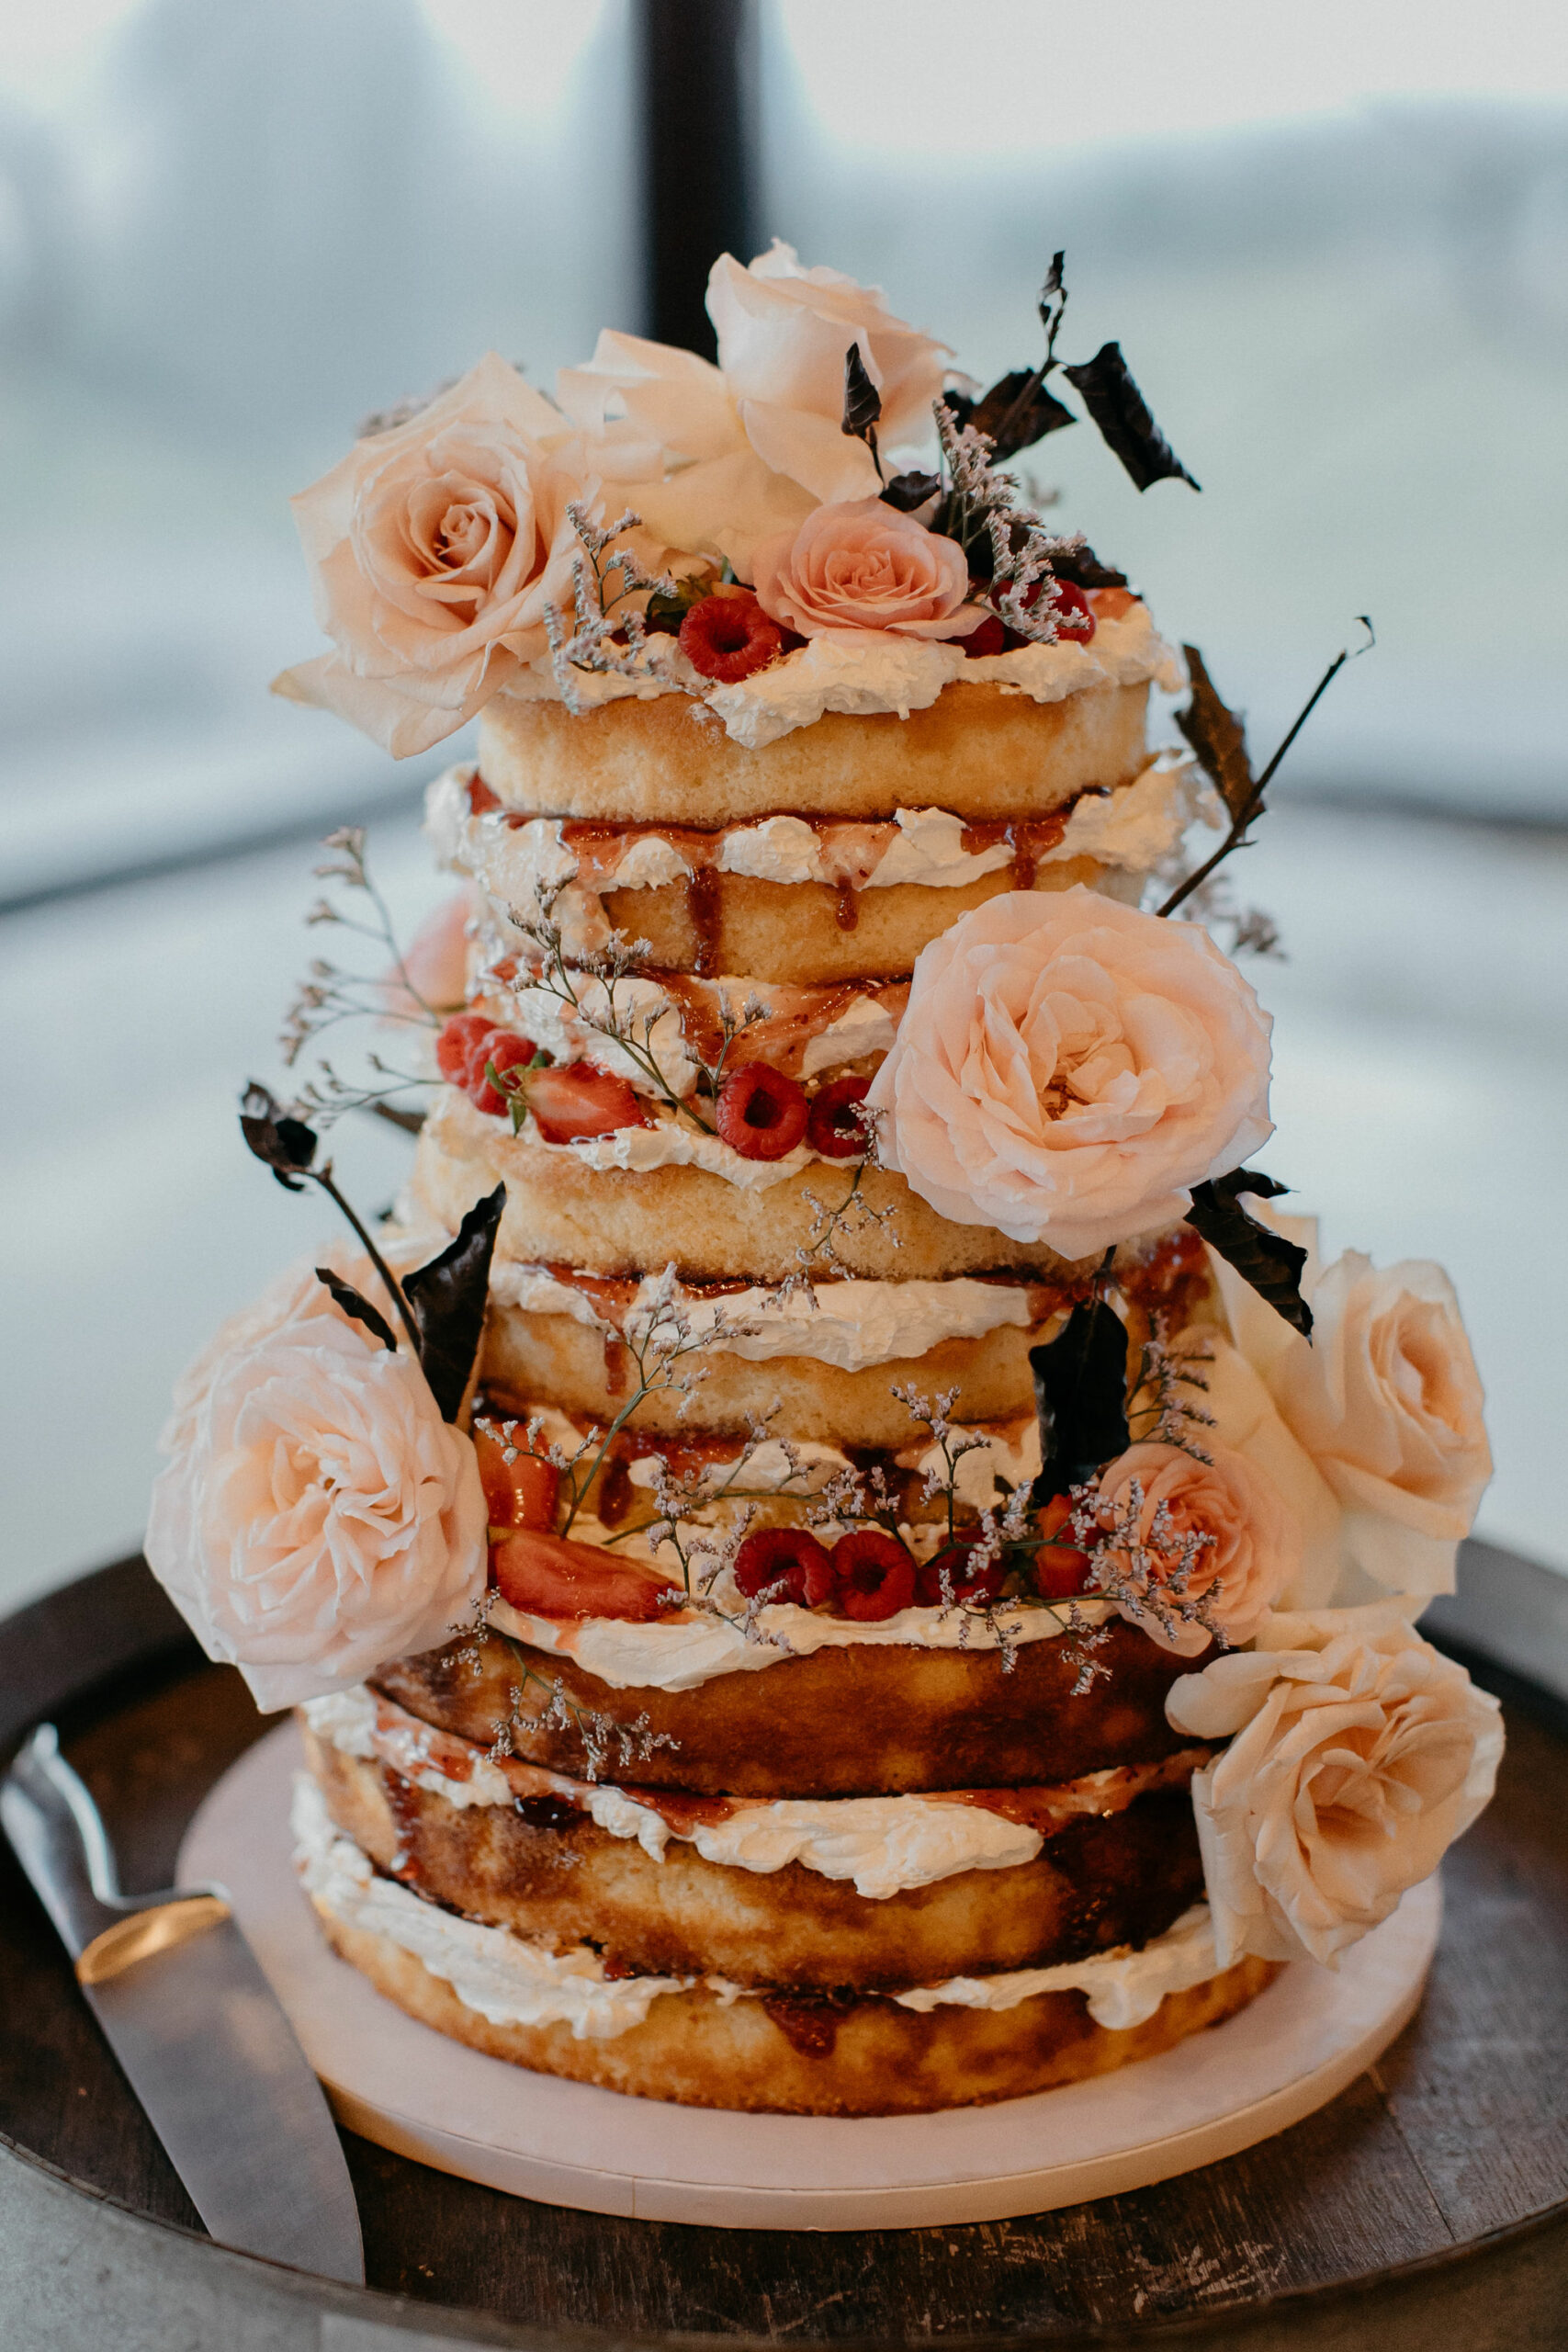 Stacy Brewer Rustic Wedding Cake